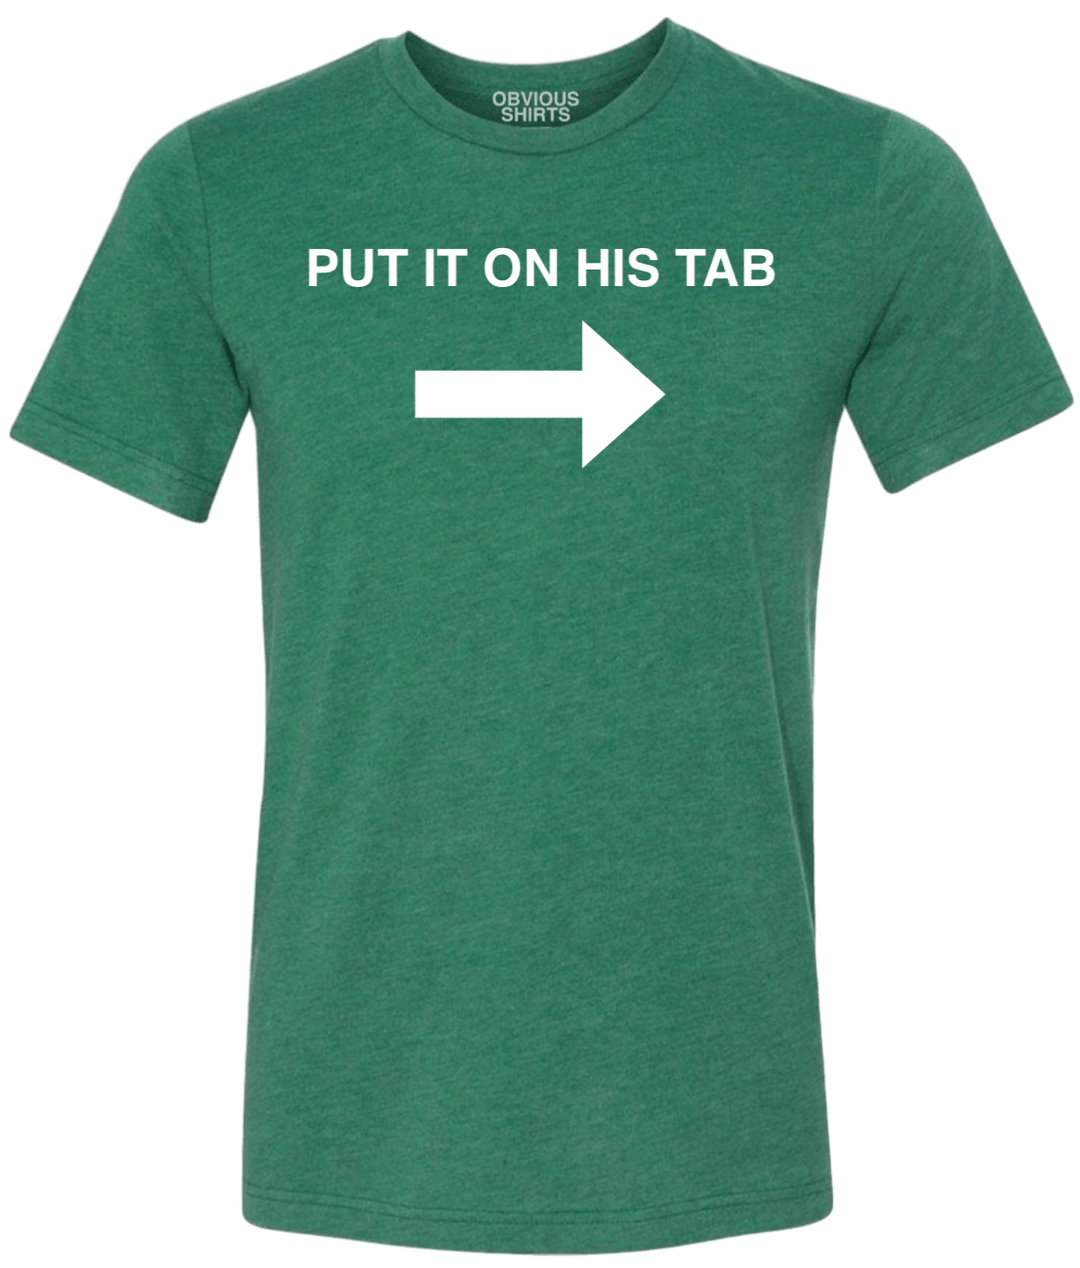 PUT IT ON HIS TAB. - OBVIOUS SHIRTS